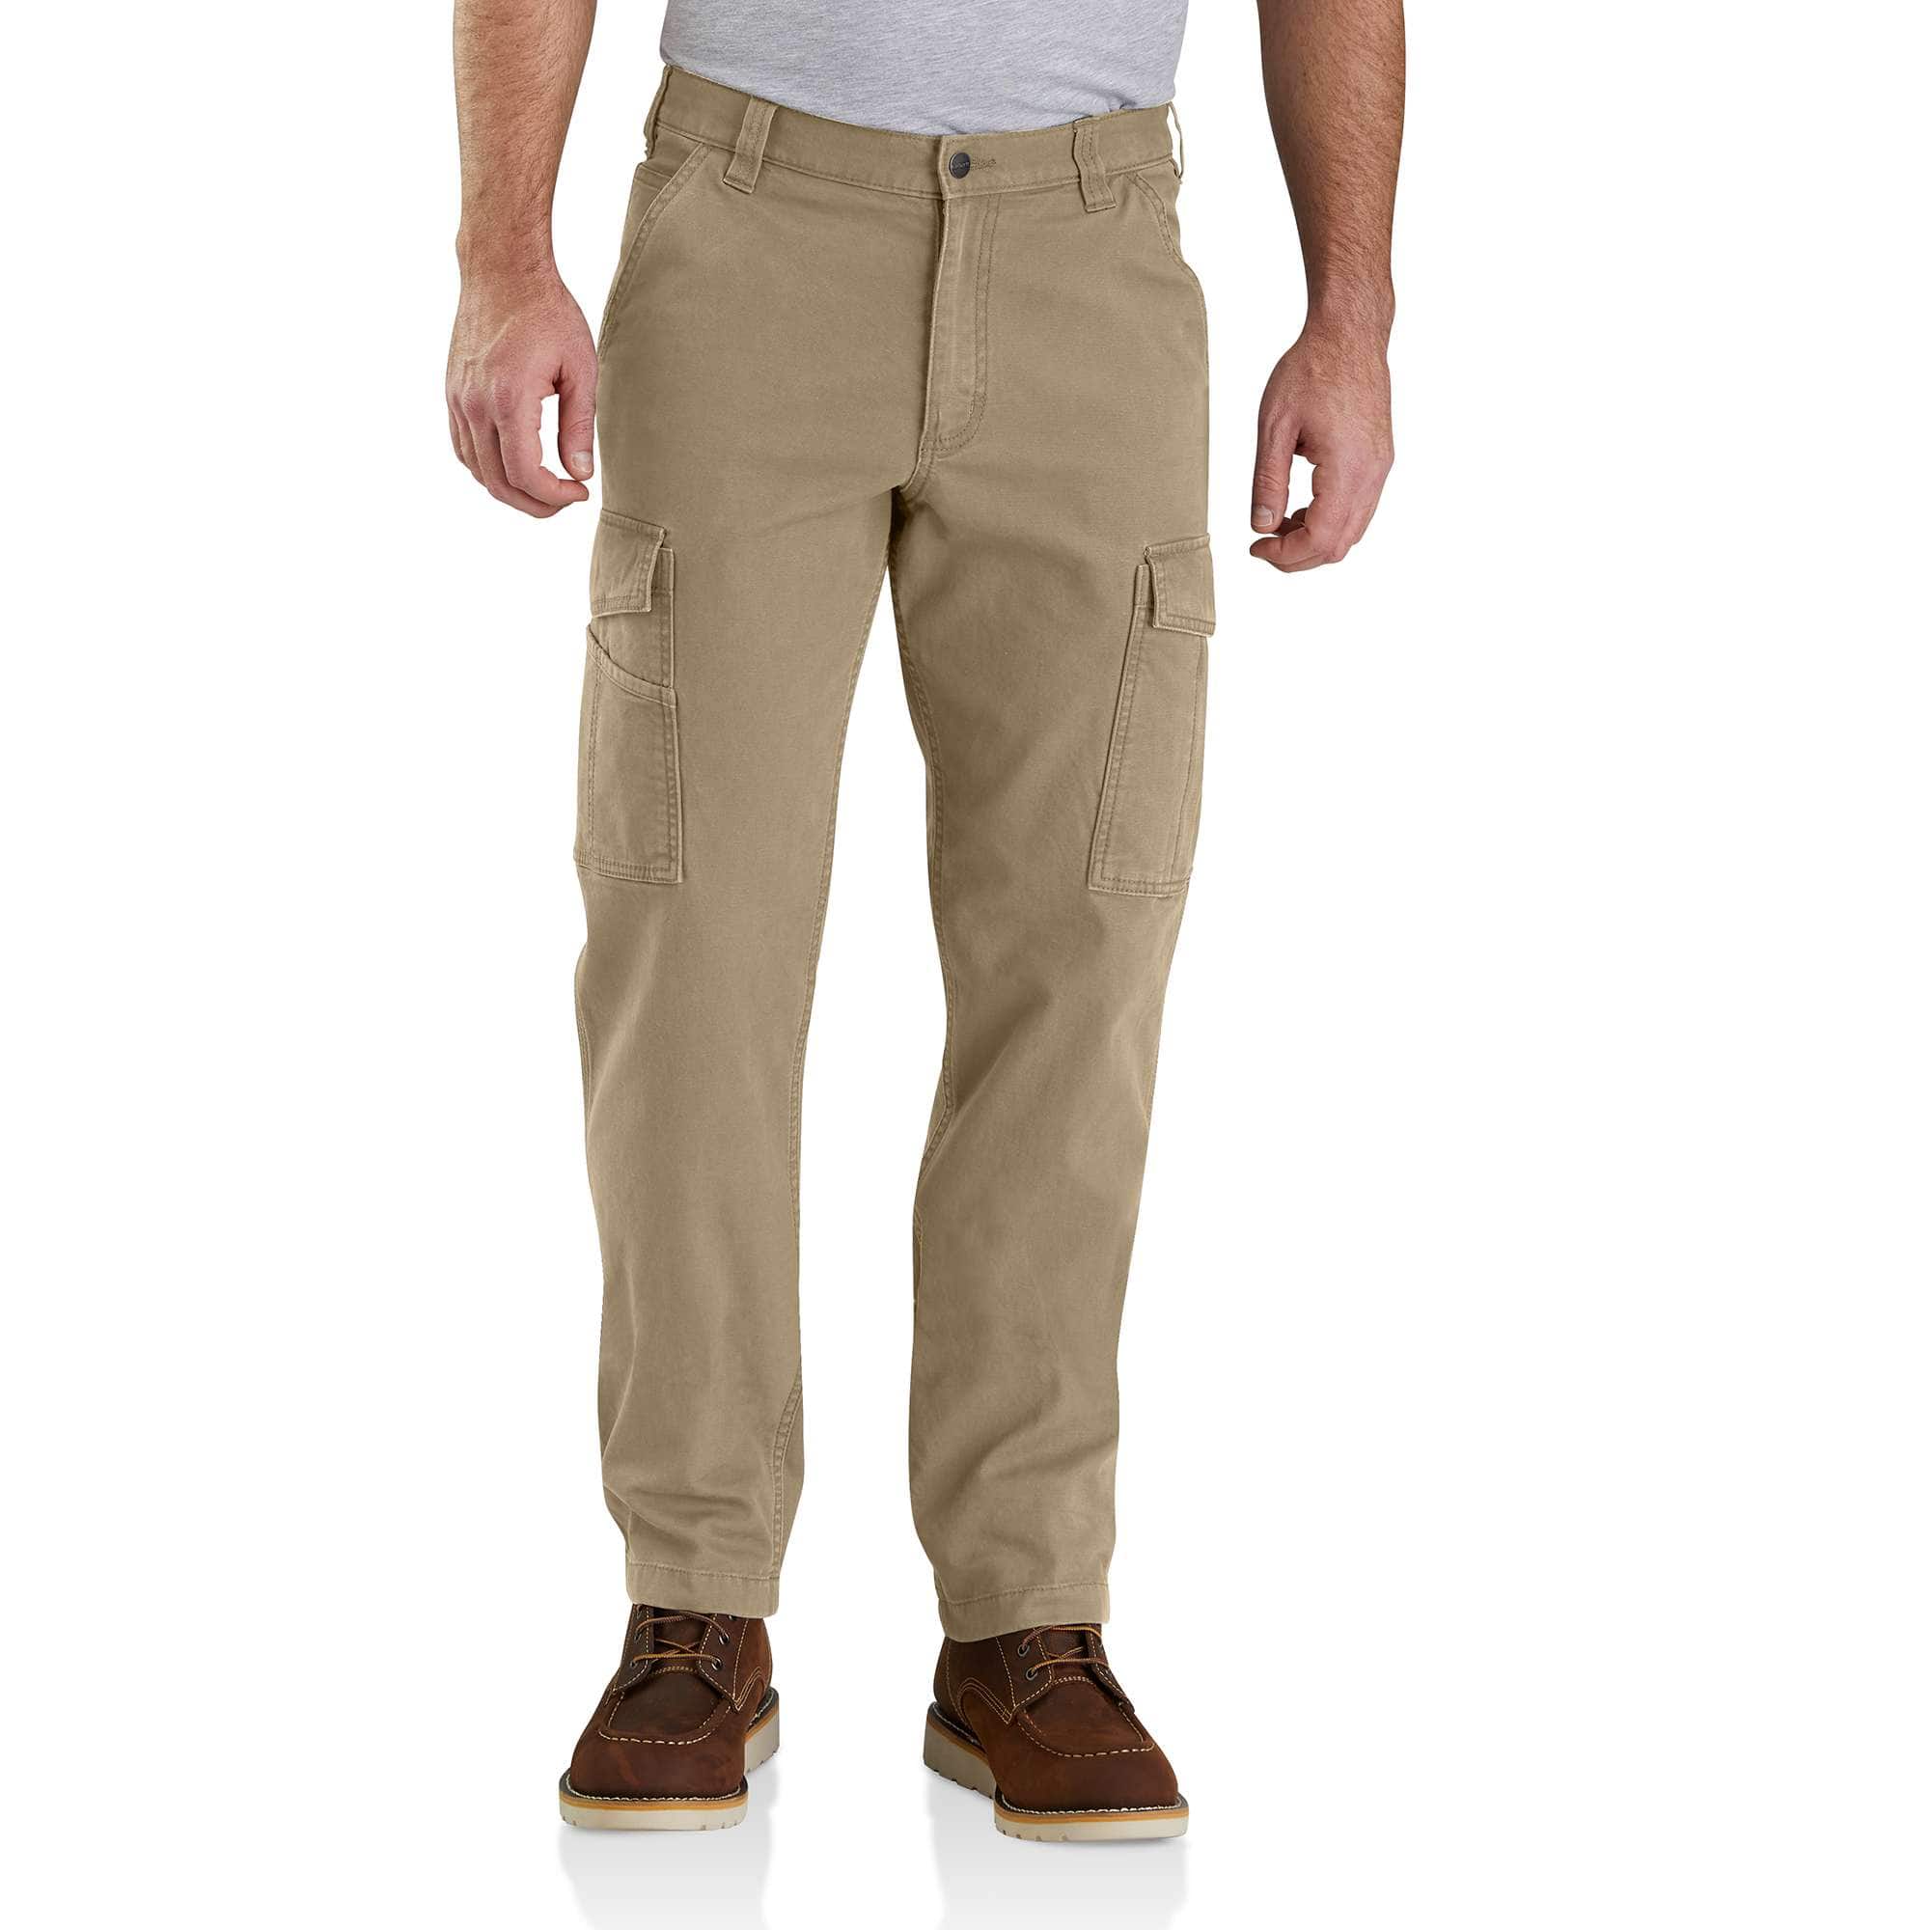 CARHARTT Women's Relaxed Fit Canvas Pant